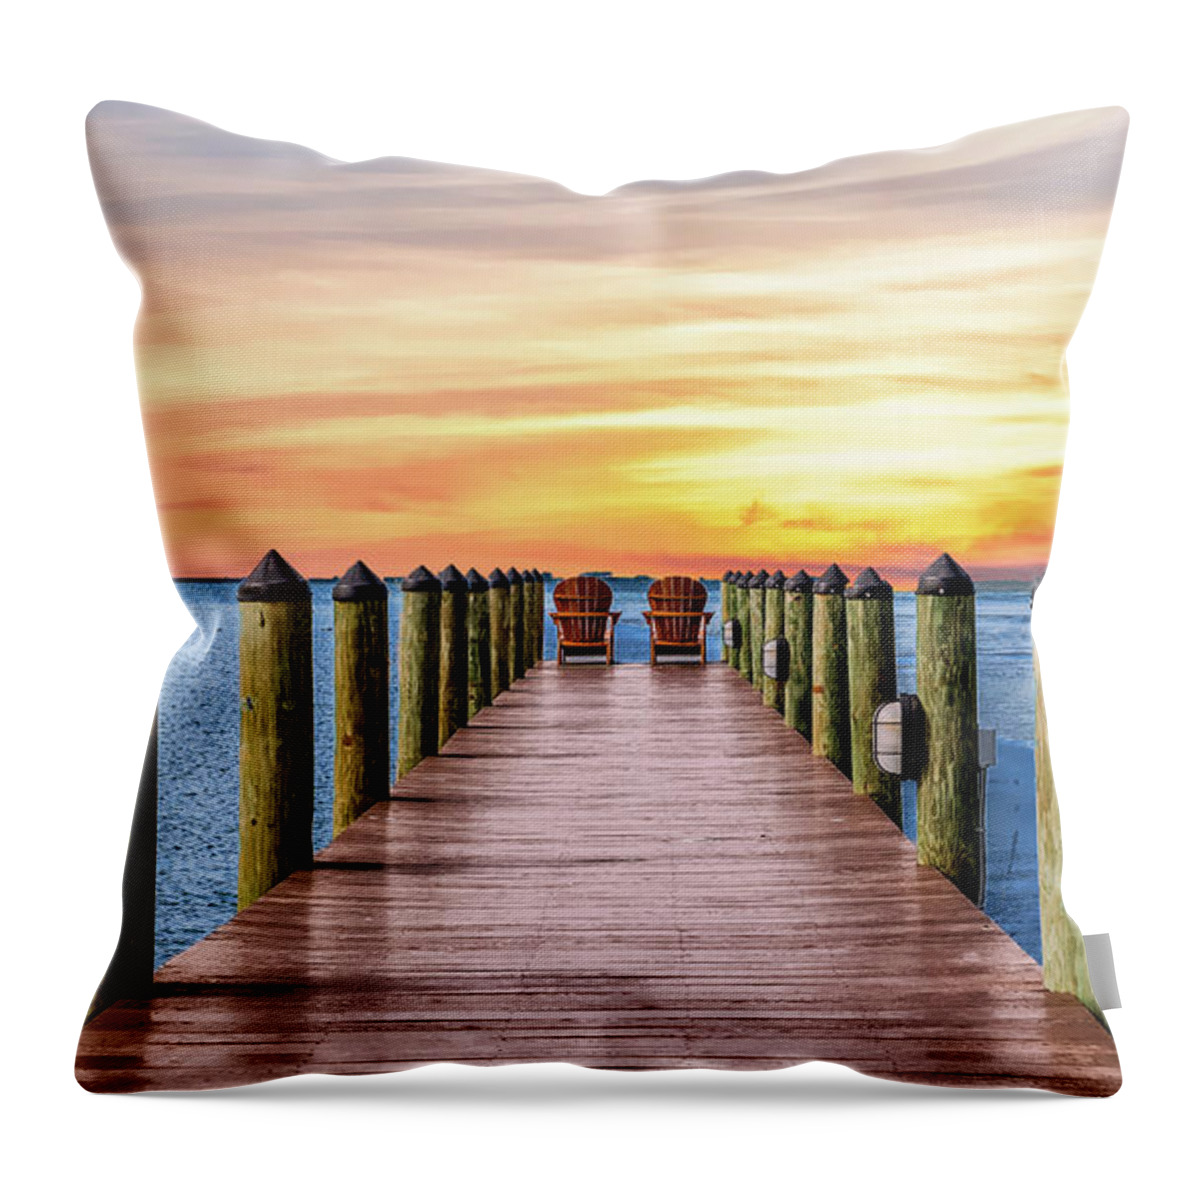 Adirondack Throw Pillow featuring the photograph Adirondack Chairs at End of Pier by Darryl Brooks